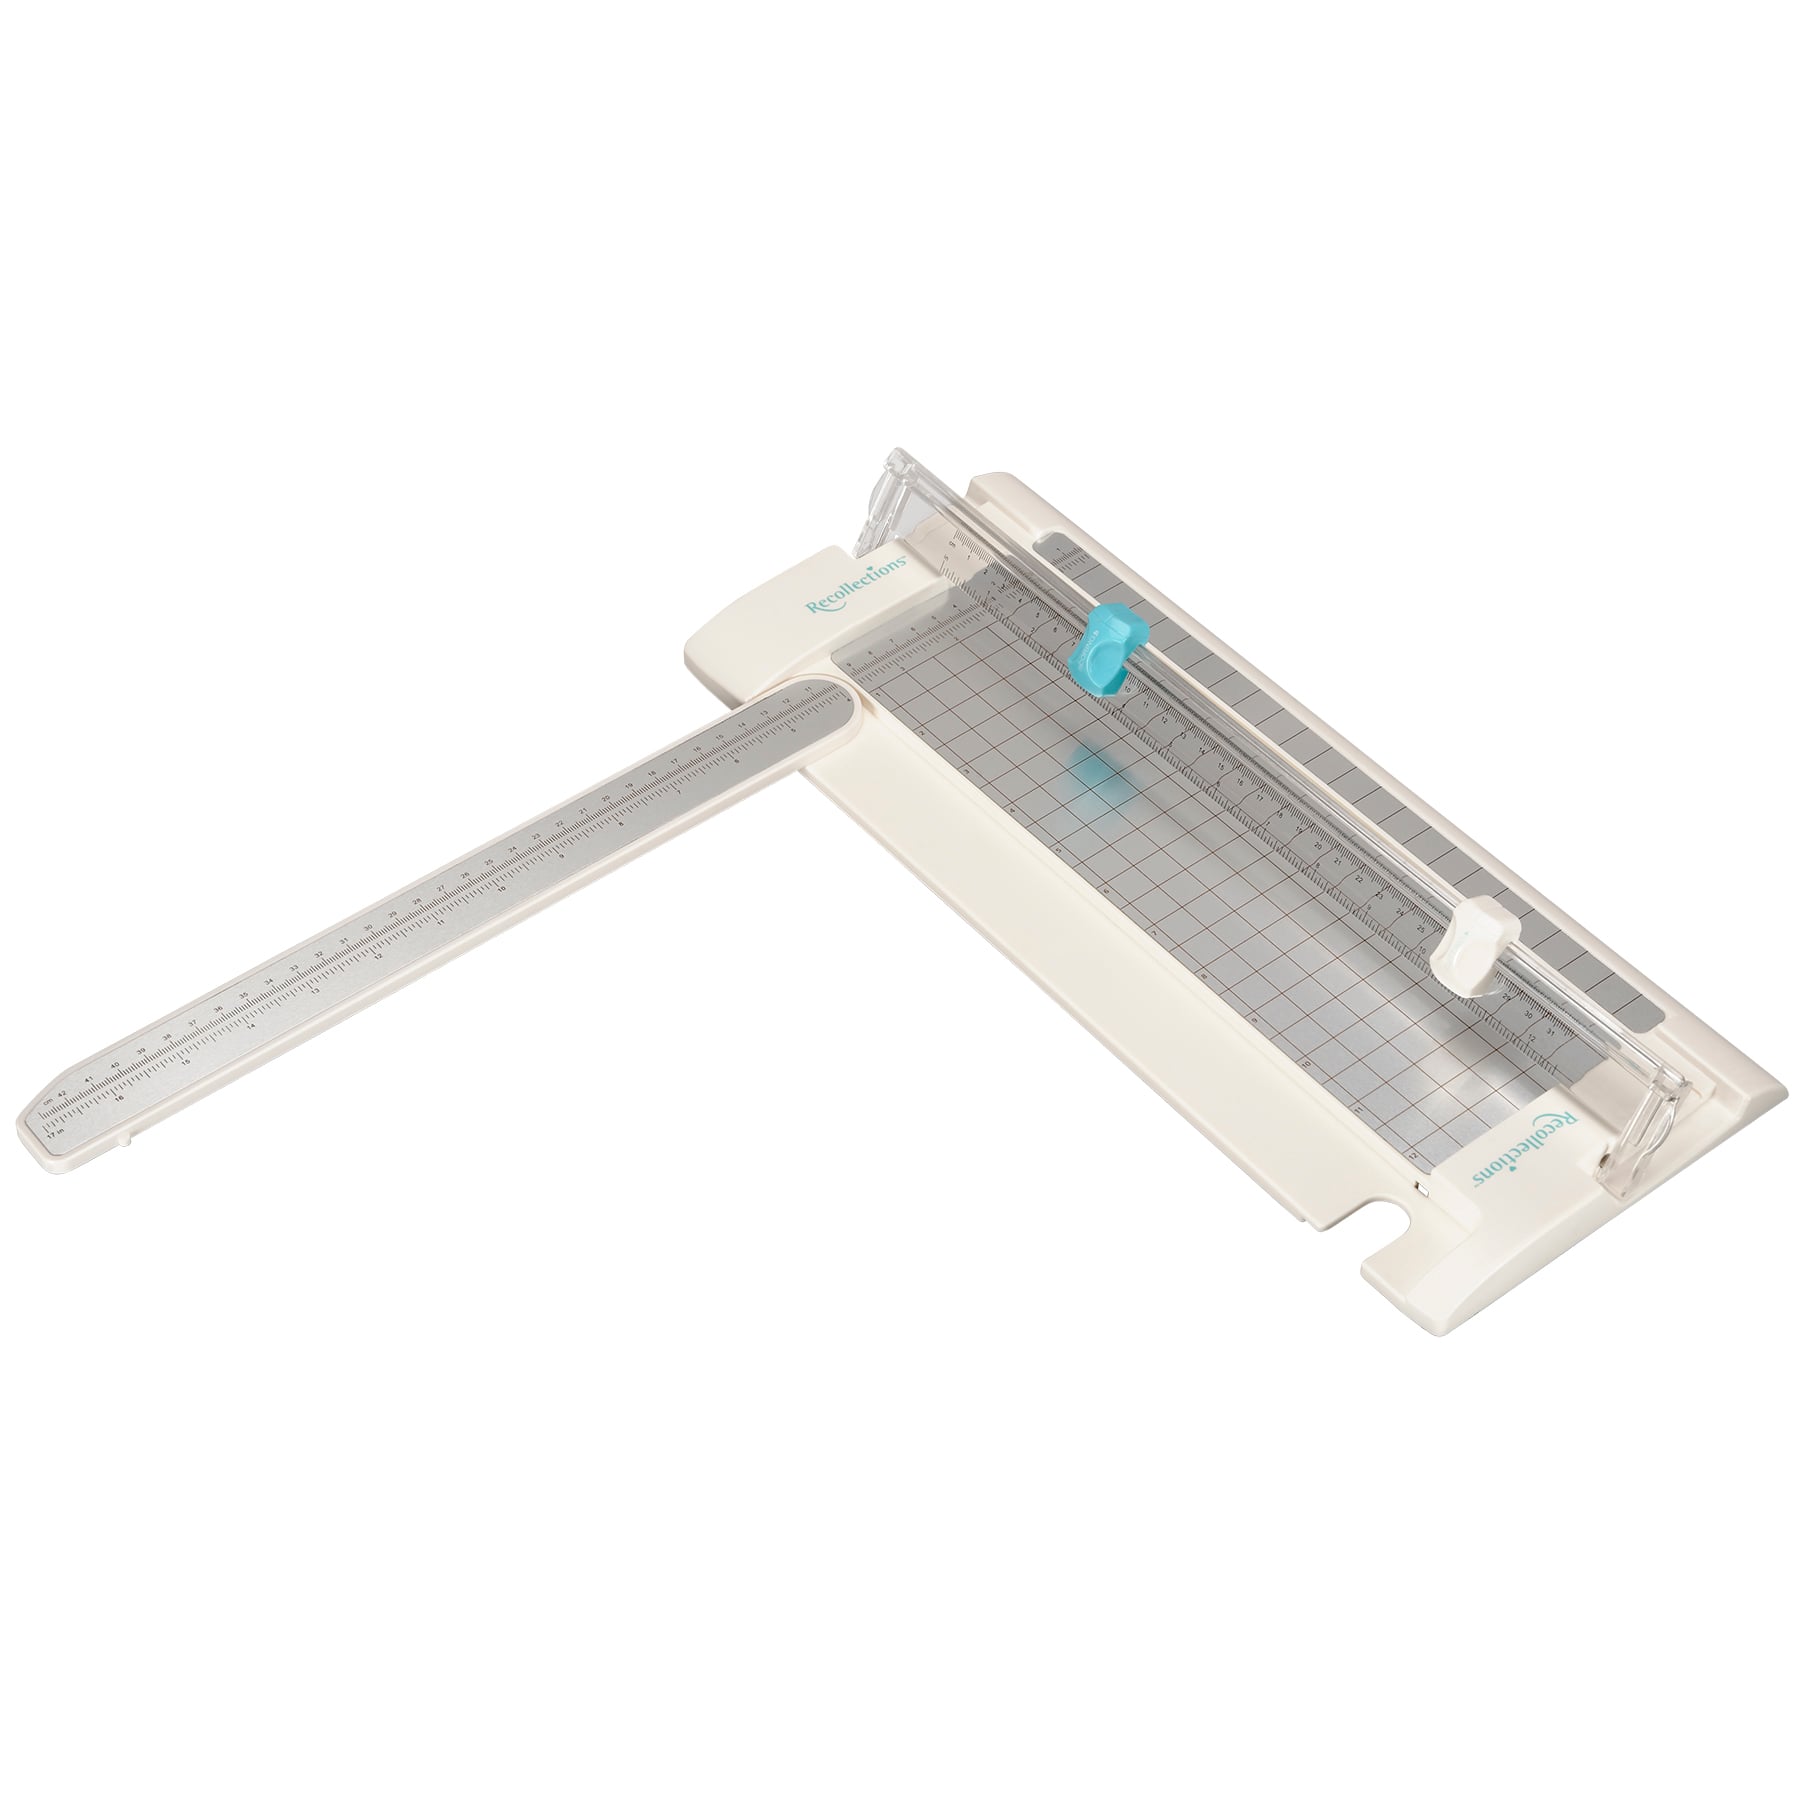 Paper Trimmer with Extending Ruler, 12 Inch Cutting Length